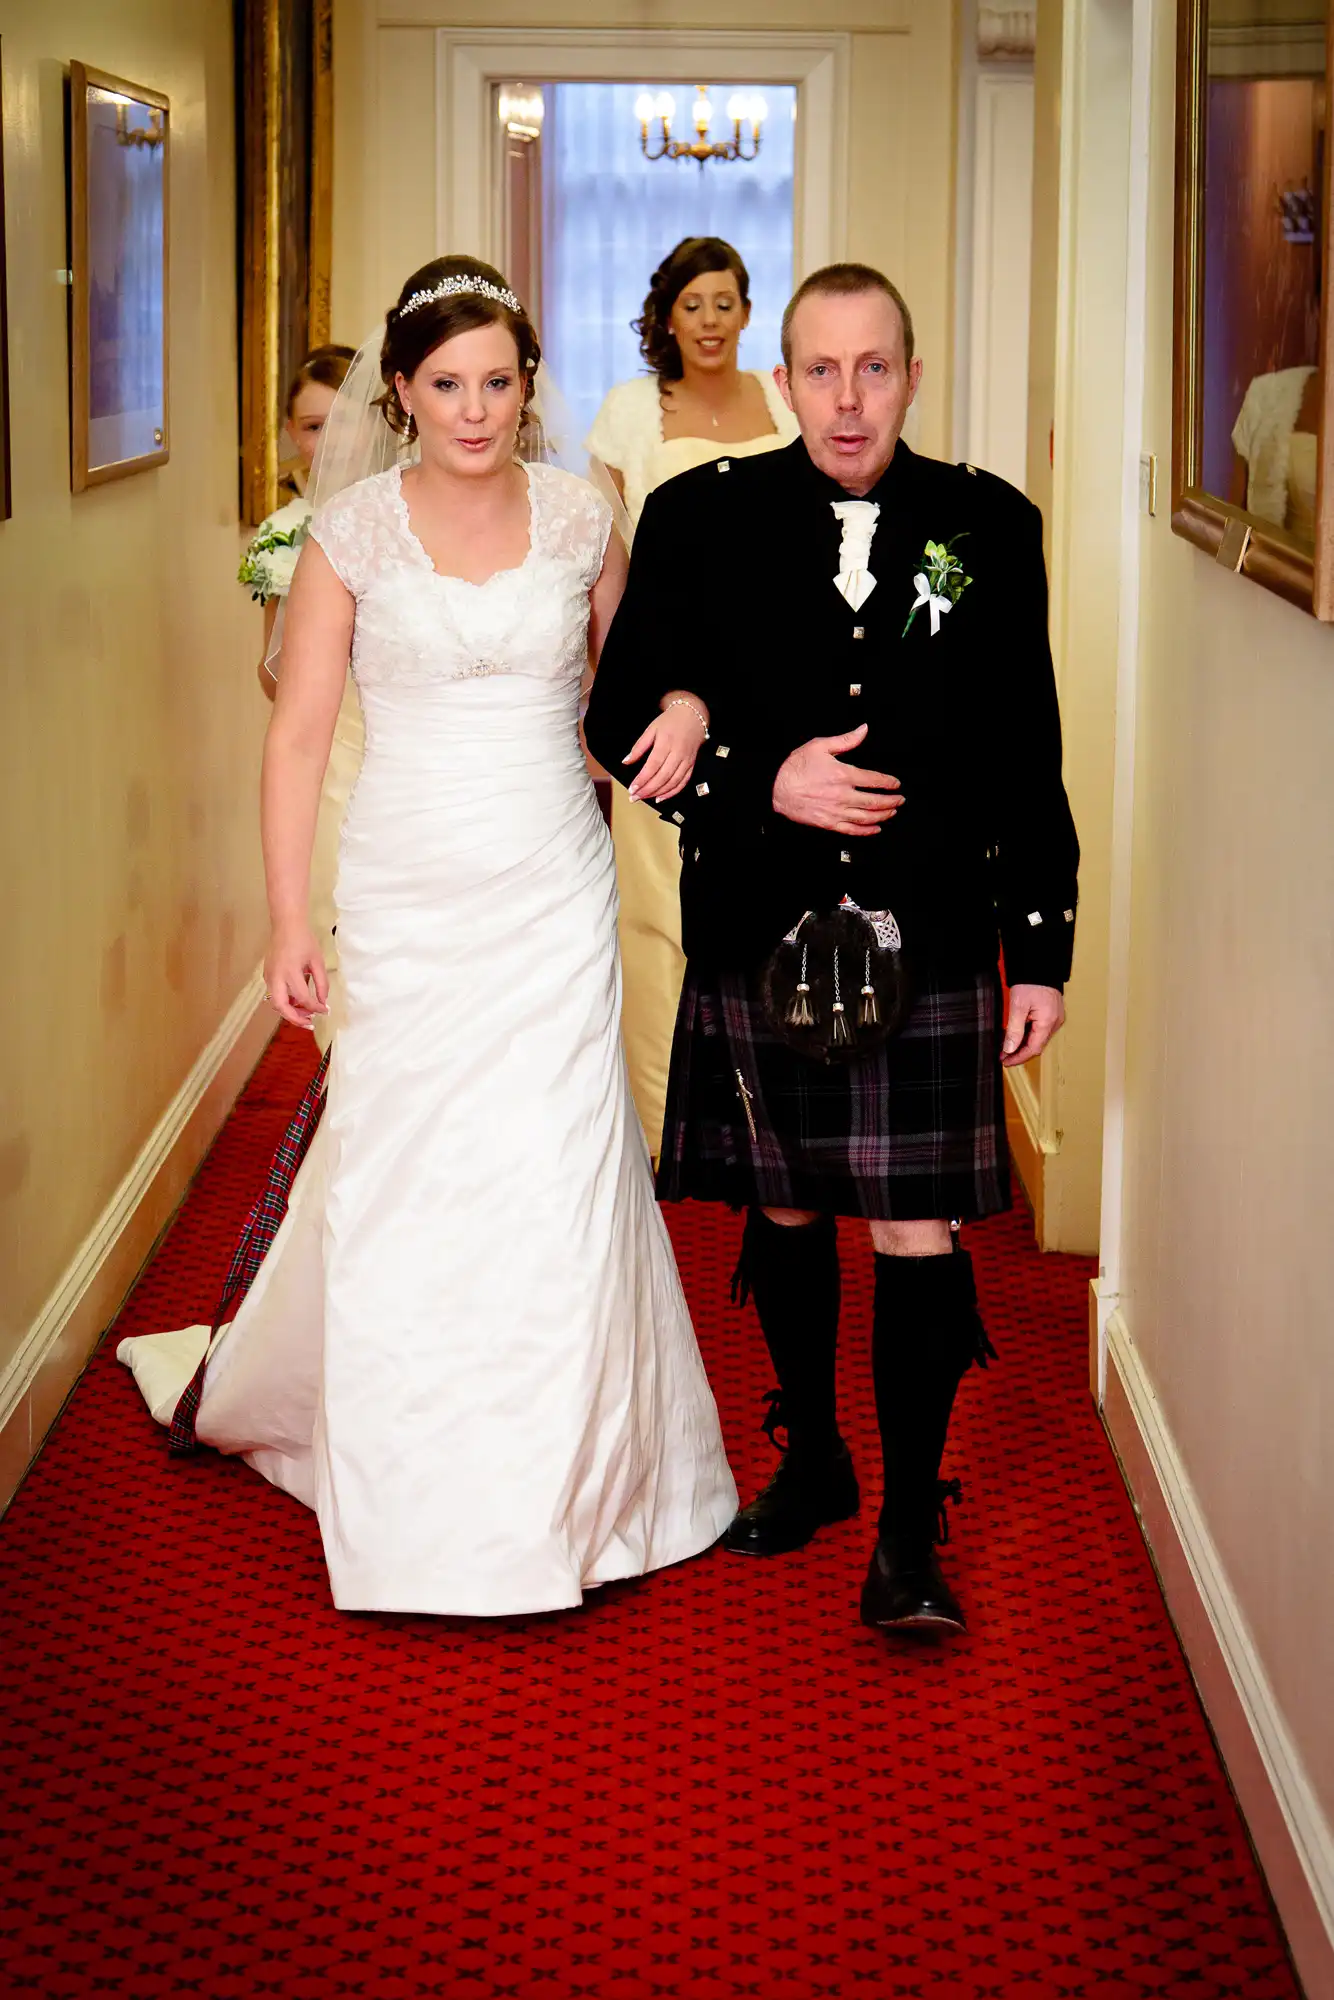 A bride in a white dress and a groom in a kilt and jacket walk down a hallway with red carpet, followed by a bridesmaid in a blue dress.